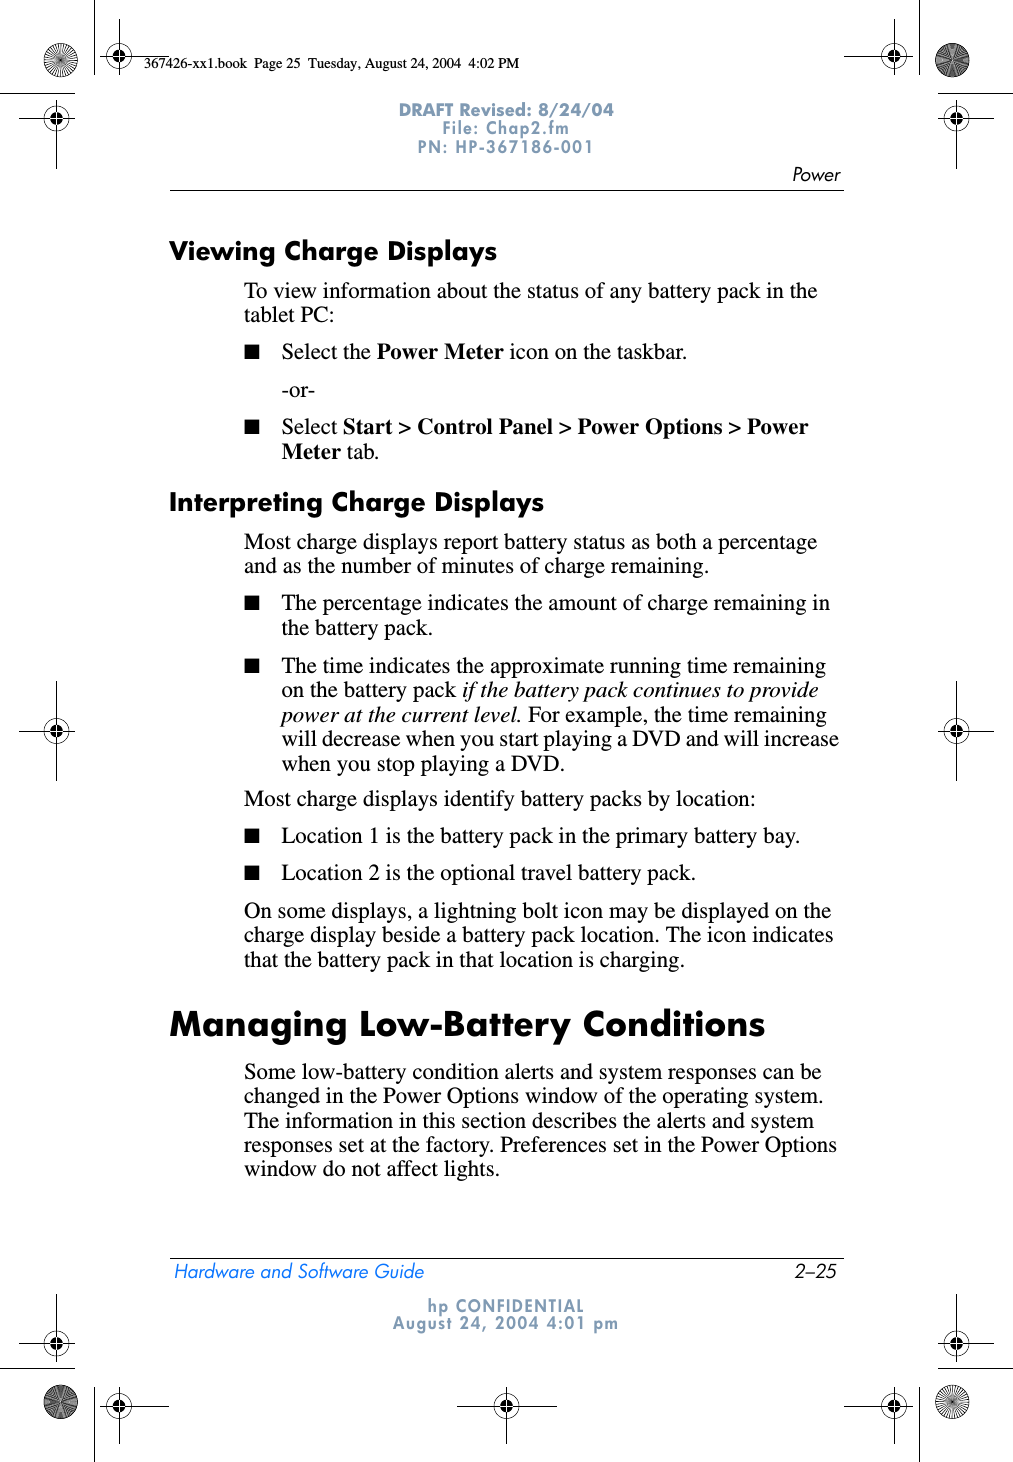 PowerHardware and Software Guide 2–25DRAFT Revised: 8/24/04File: Chap2.fm PN: HP-367186-001 hp CONFIDENTIALAugust 24, 2004 4:01 pmViewing Charge DisplaysTo view information about the status of any battery pack in the tablet PC:■Select the Power Meter icon on the taskbar.-or-■Select Start &gt; Control Panel &gt; Power Options &gt; Power Meter tab.Interpreting Charge DisplaysMost charge displays report battery status as both a percentage and as the number of minutes of charge remaining.■The percentage indicates the amount of charge remaining in the battery pack.■The time indicates the approximate running time remaining on the battery pack if the battery pack continues to provide power at the current level. For example, the time remaining will decrease when you start playing a DVD and will increase when you stop playing a DVD.Most charge displays identify battery packs by location:■Location 1 is the battery pack in the primary battery bay.■Location 2 is the optional travel battery pack.On some displays, a lightning bolt icon may be displayed on the charge display beside a battery pack location. The icon indicates that the battery pack in that location is charging.Managing Low-Battery ConditionsSome low-battery condition alerts and system responses can be changed in the Power Options window of the operating system. The information in this section describes the alerts and system responses set at the factory. Preferences set in the Power Options window do not affect lights.367426-xx1.book  Page 25  Tuesday, August 24, 2004  4:02 PM